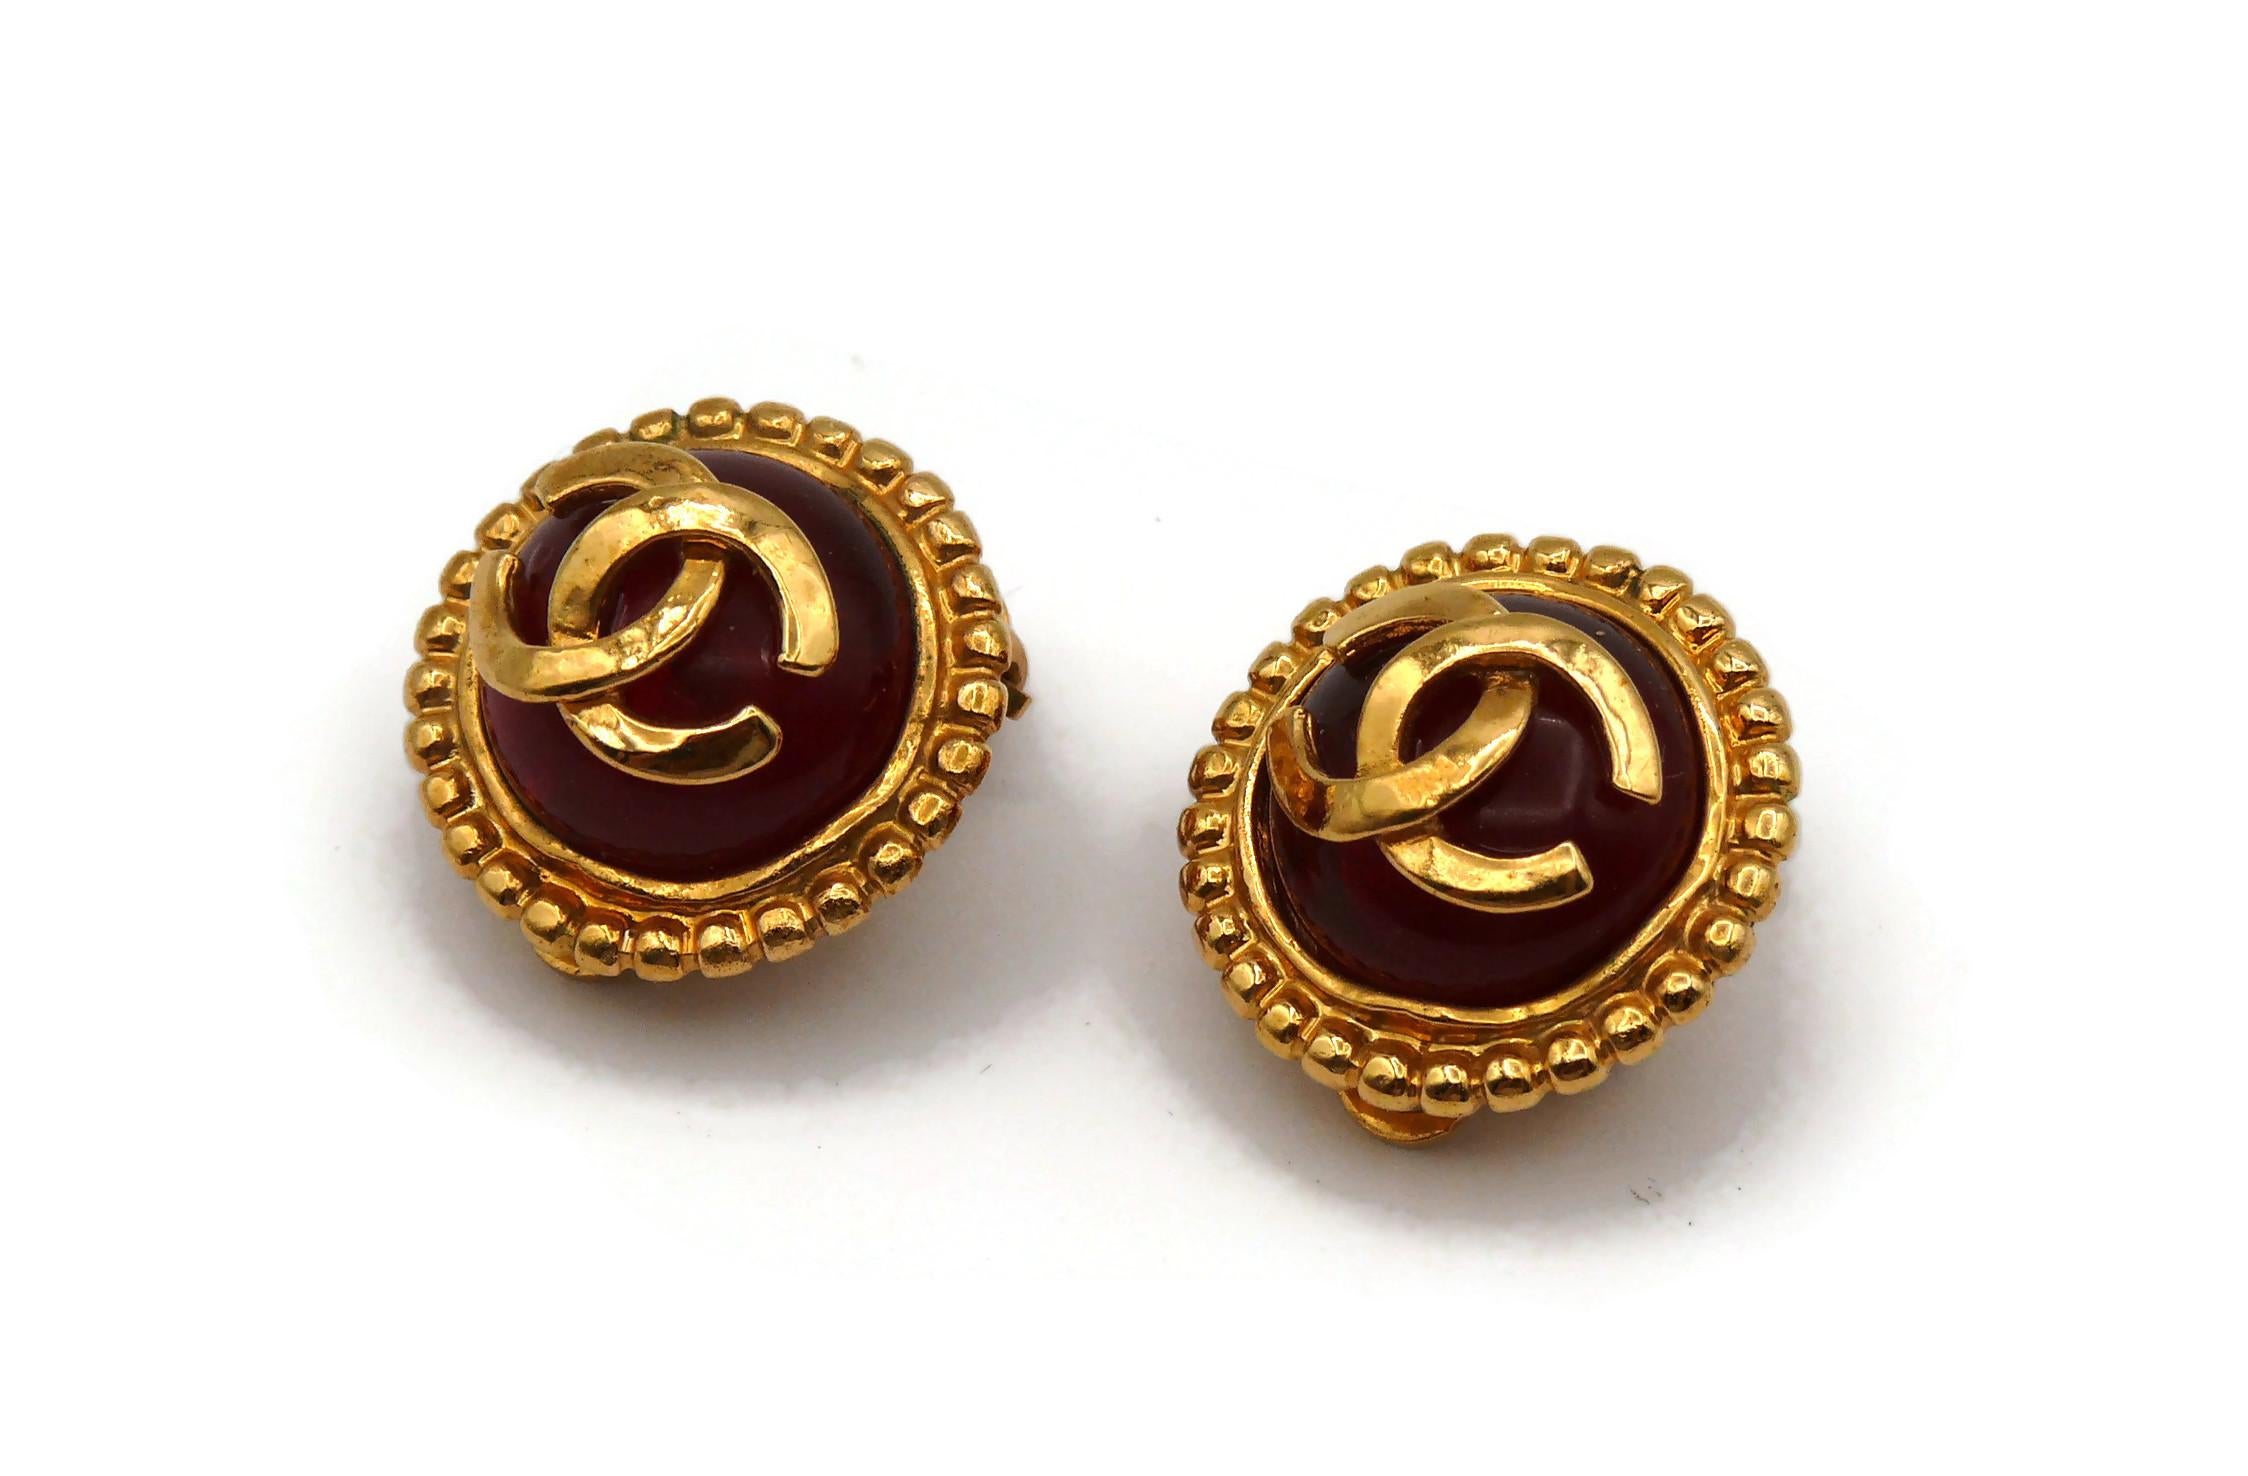 CHANEL by KARL LAGERFELD Vintage Gripoix CC Clip-On Earrings, 1997 For Sale 3